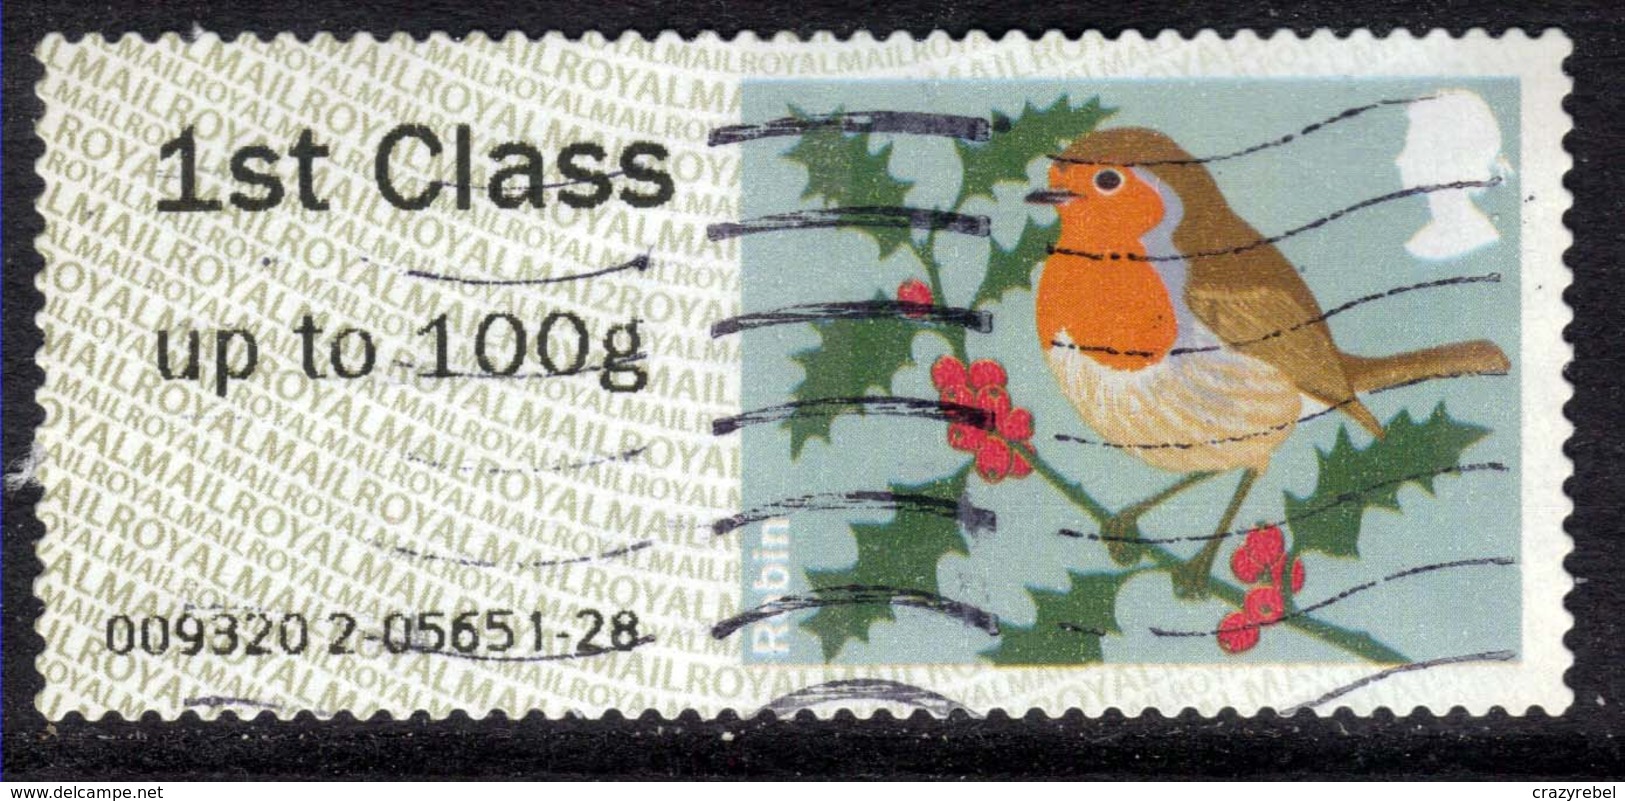 GB 2012 QE2 1st Up To 100gms Post & Go Christmas Robin ( M951 ) - Post & Go (distributeurs)